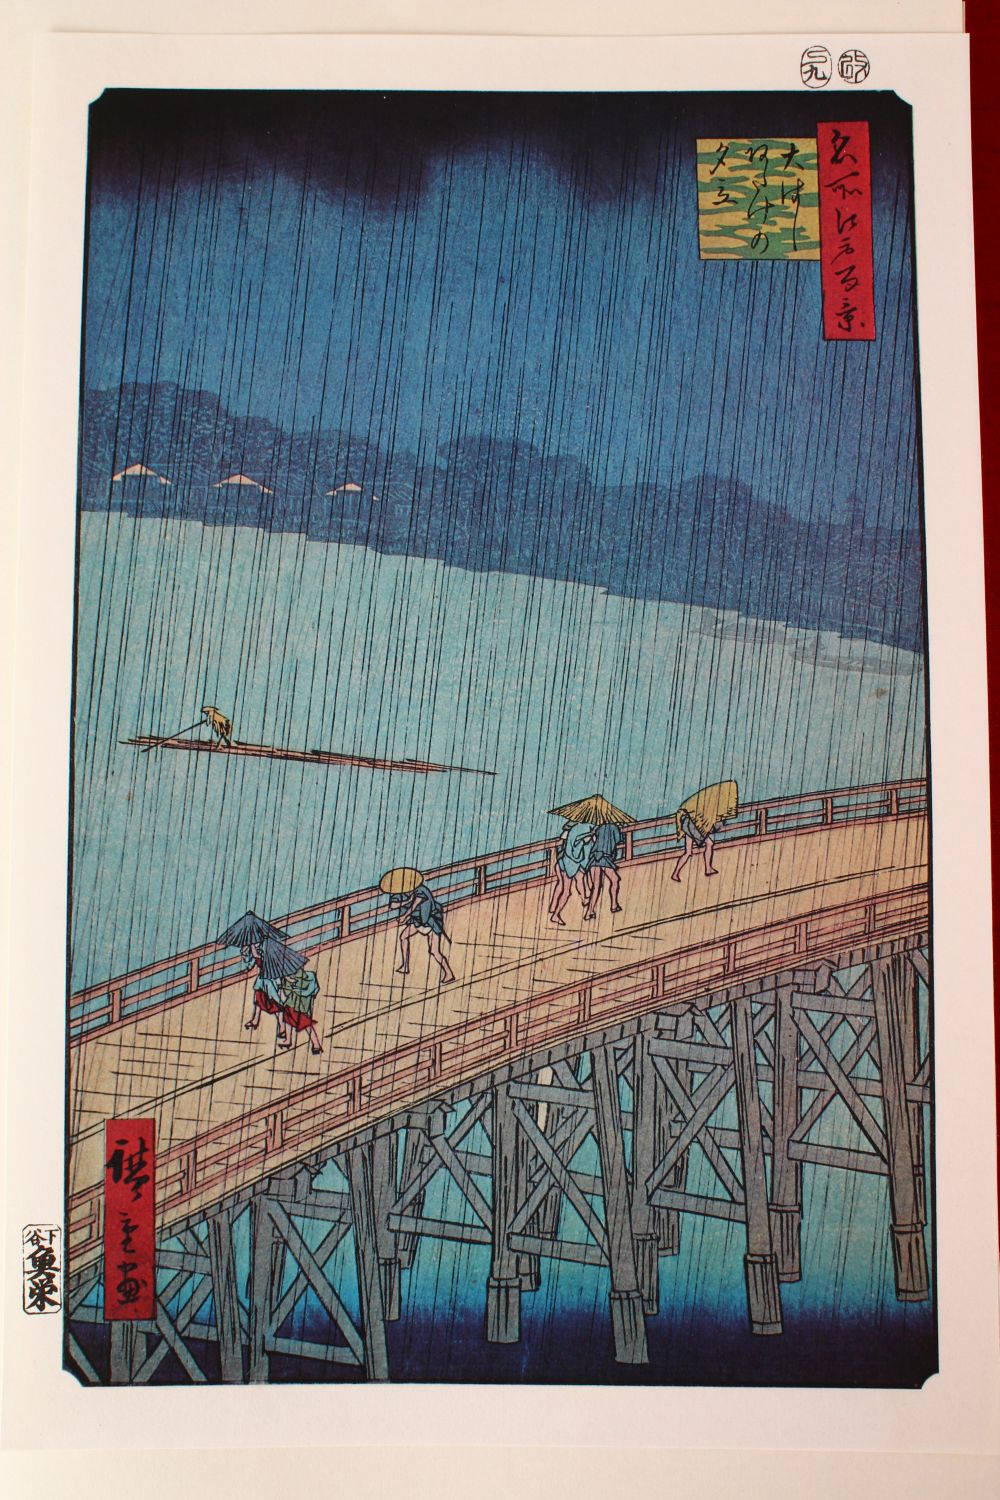 A GOOD JAPANESE WOODBLOCK SERIES BY HIROSHIGE, In a fabric bouond case and cardboard slip,. - Image 9 of 15